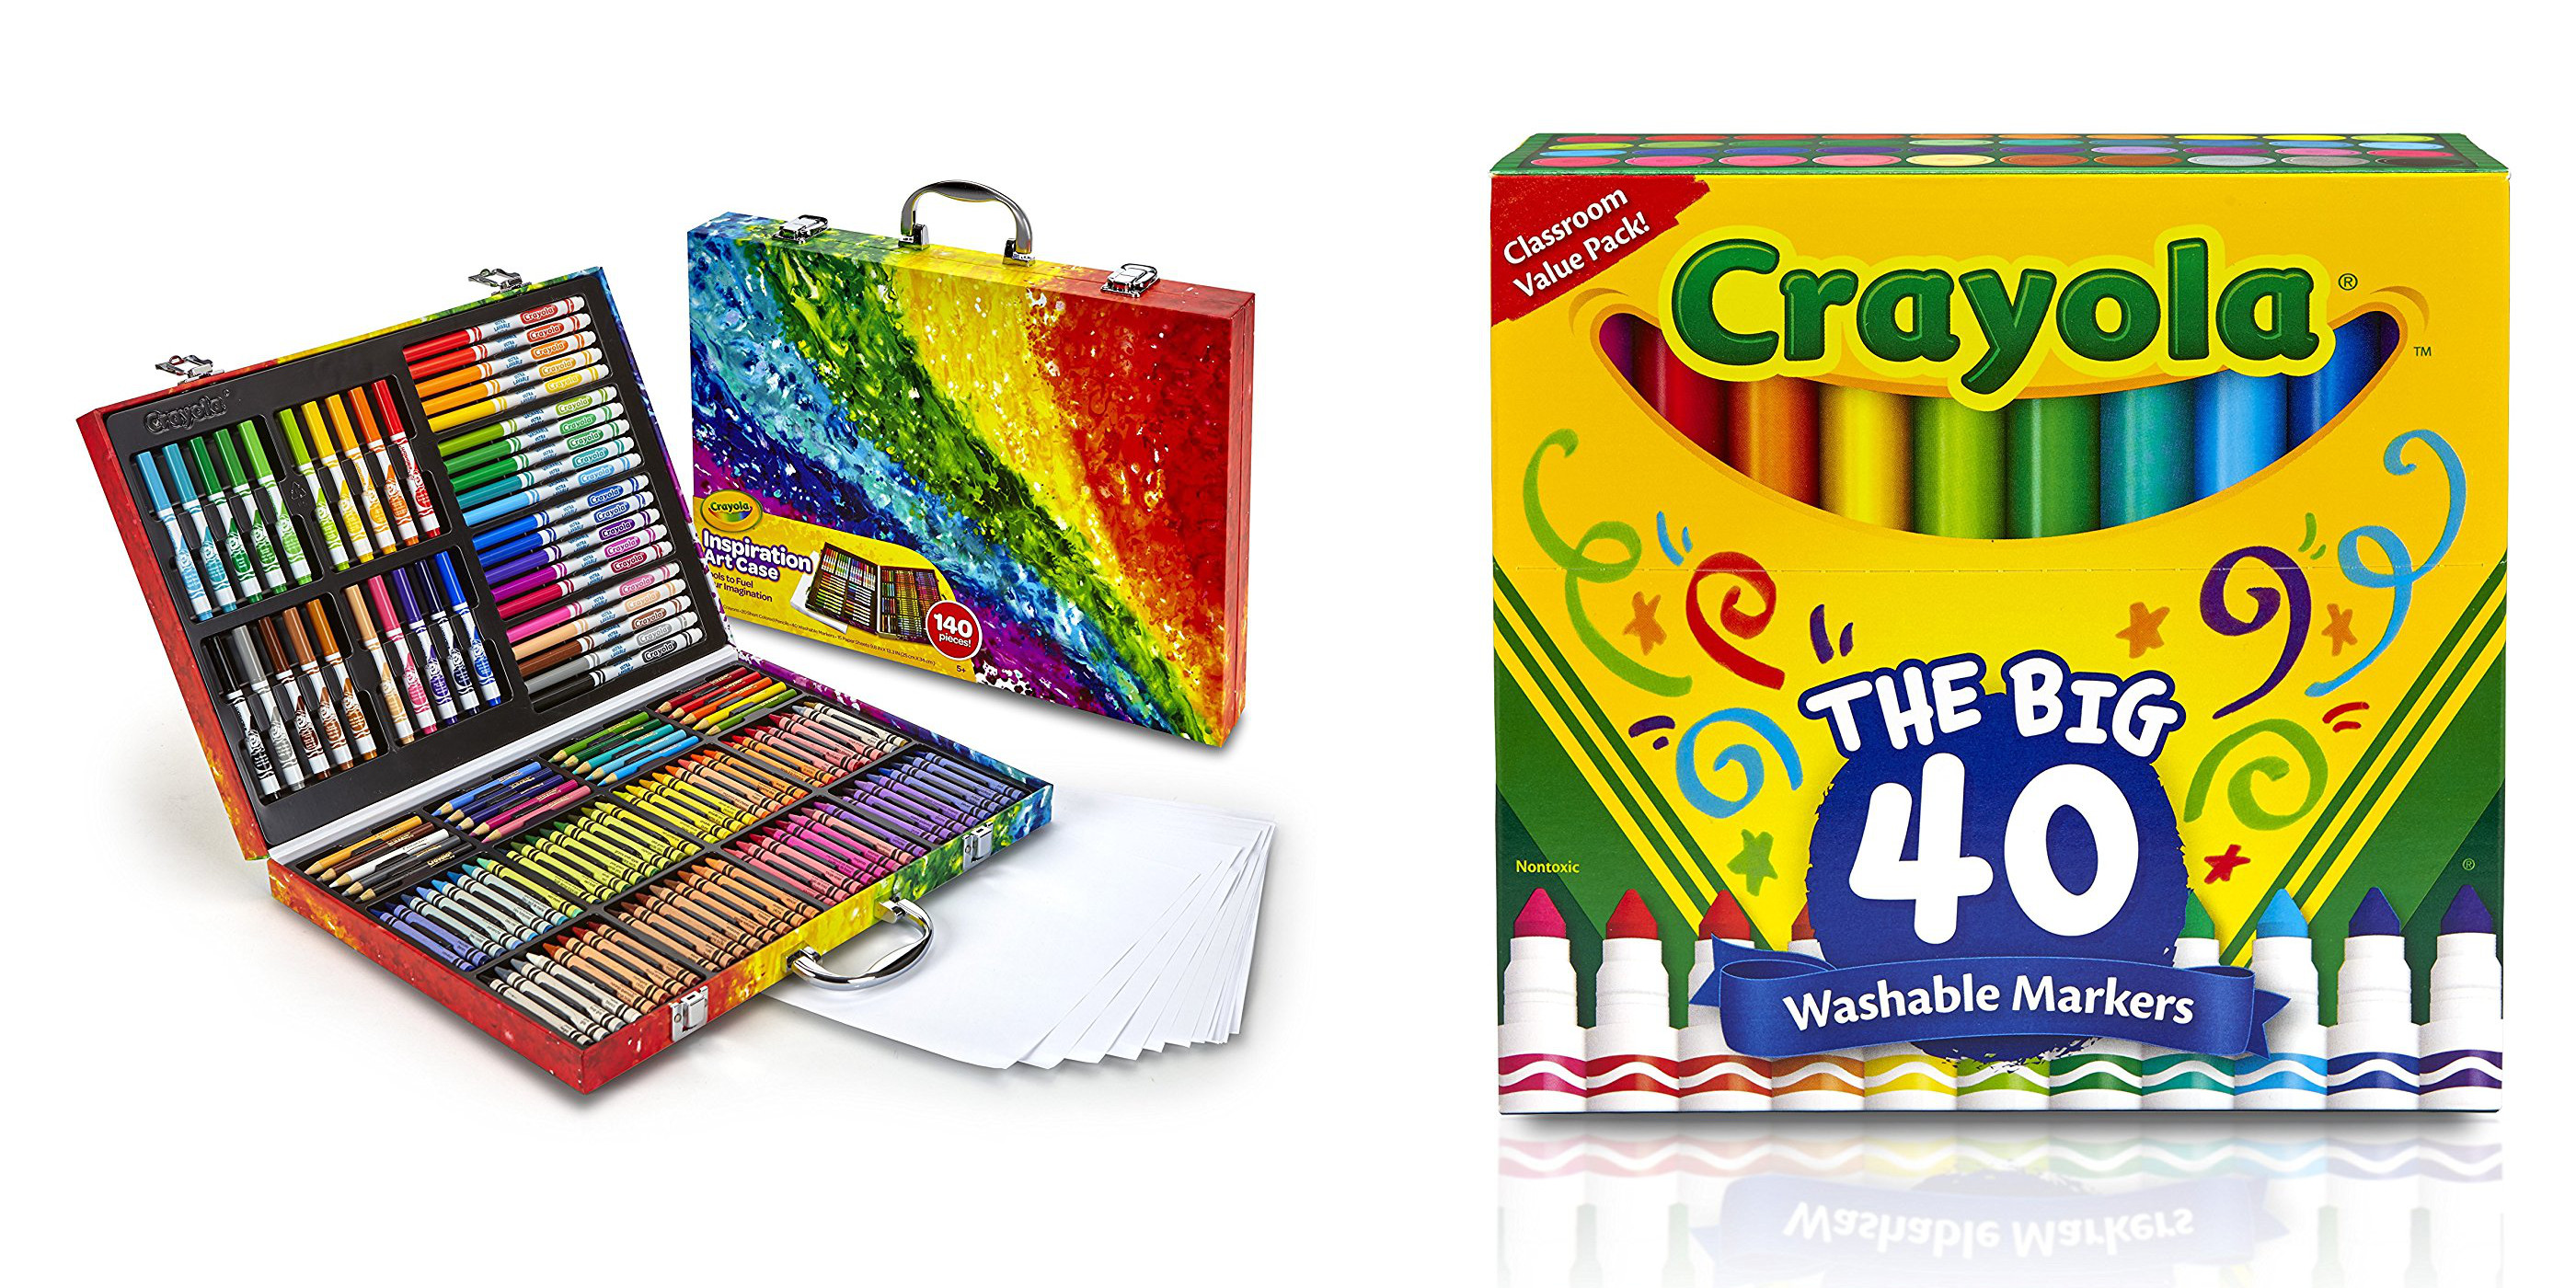 https://9to5toys.com/wp-content/uploads/sites/5/2018/03/amazon-crayola-easter-2018.jpg